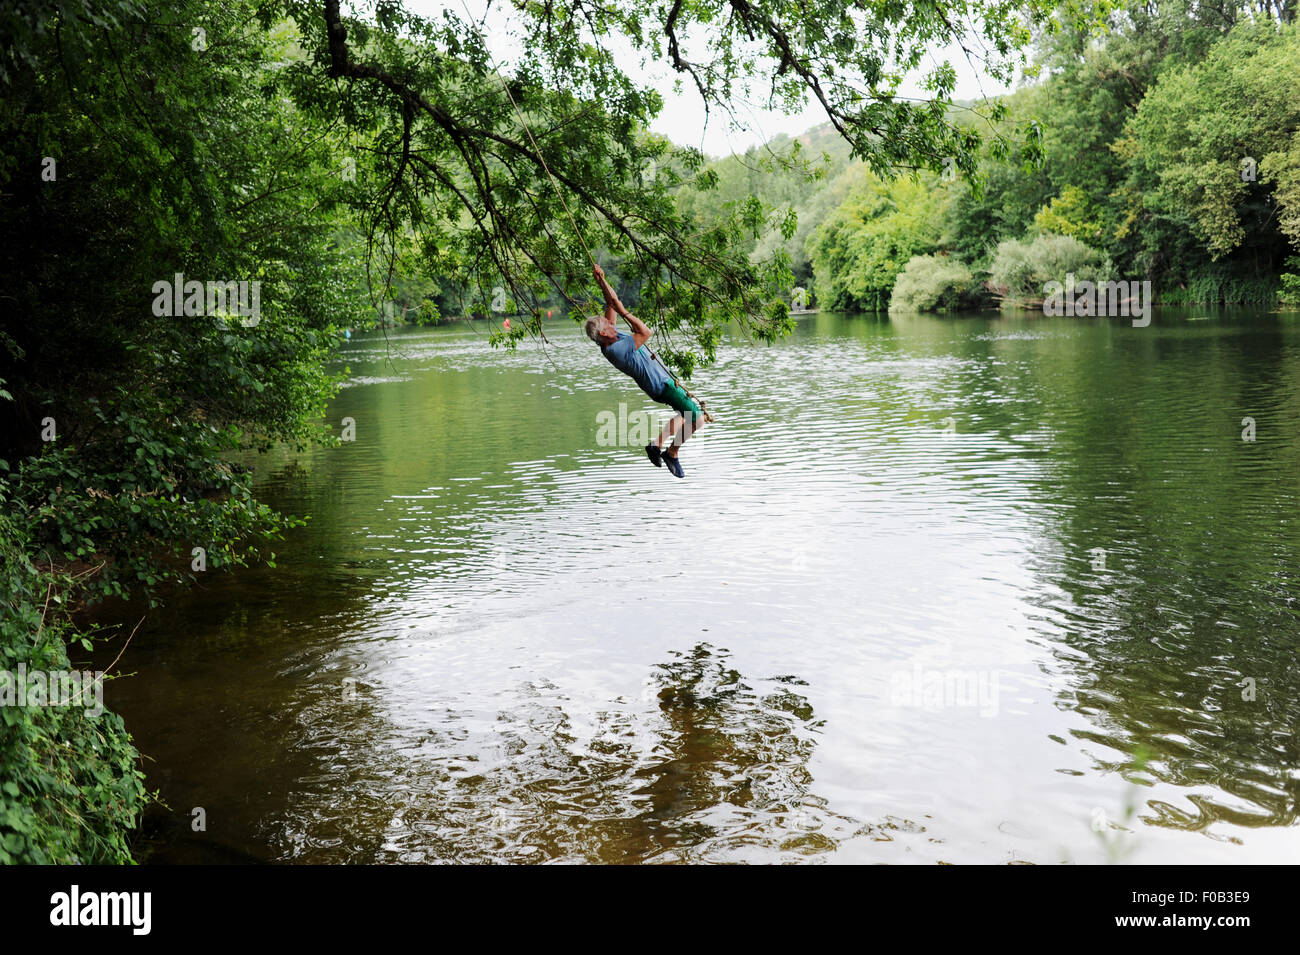 The River Lot in the Midi-Pyrenees area of France Europe Tourist male man swinging from a rope into the river Photograph taken by Simon Dack Stock Photo